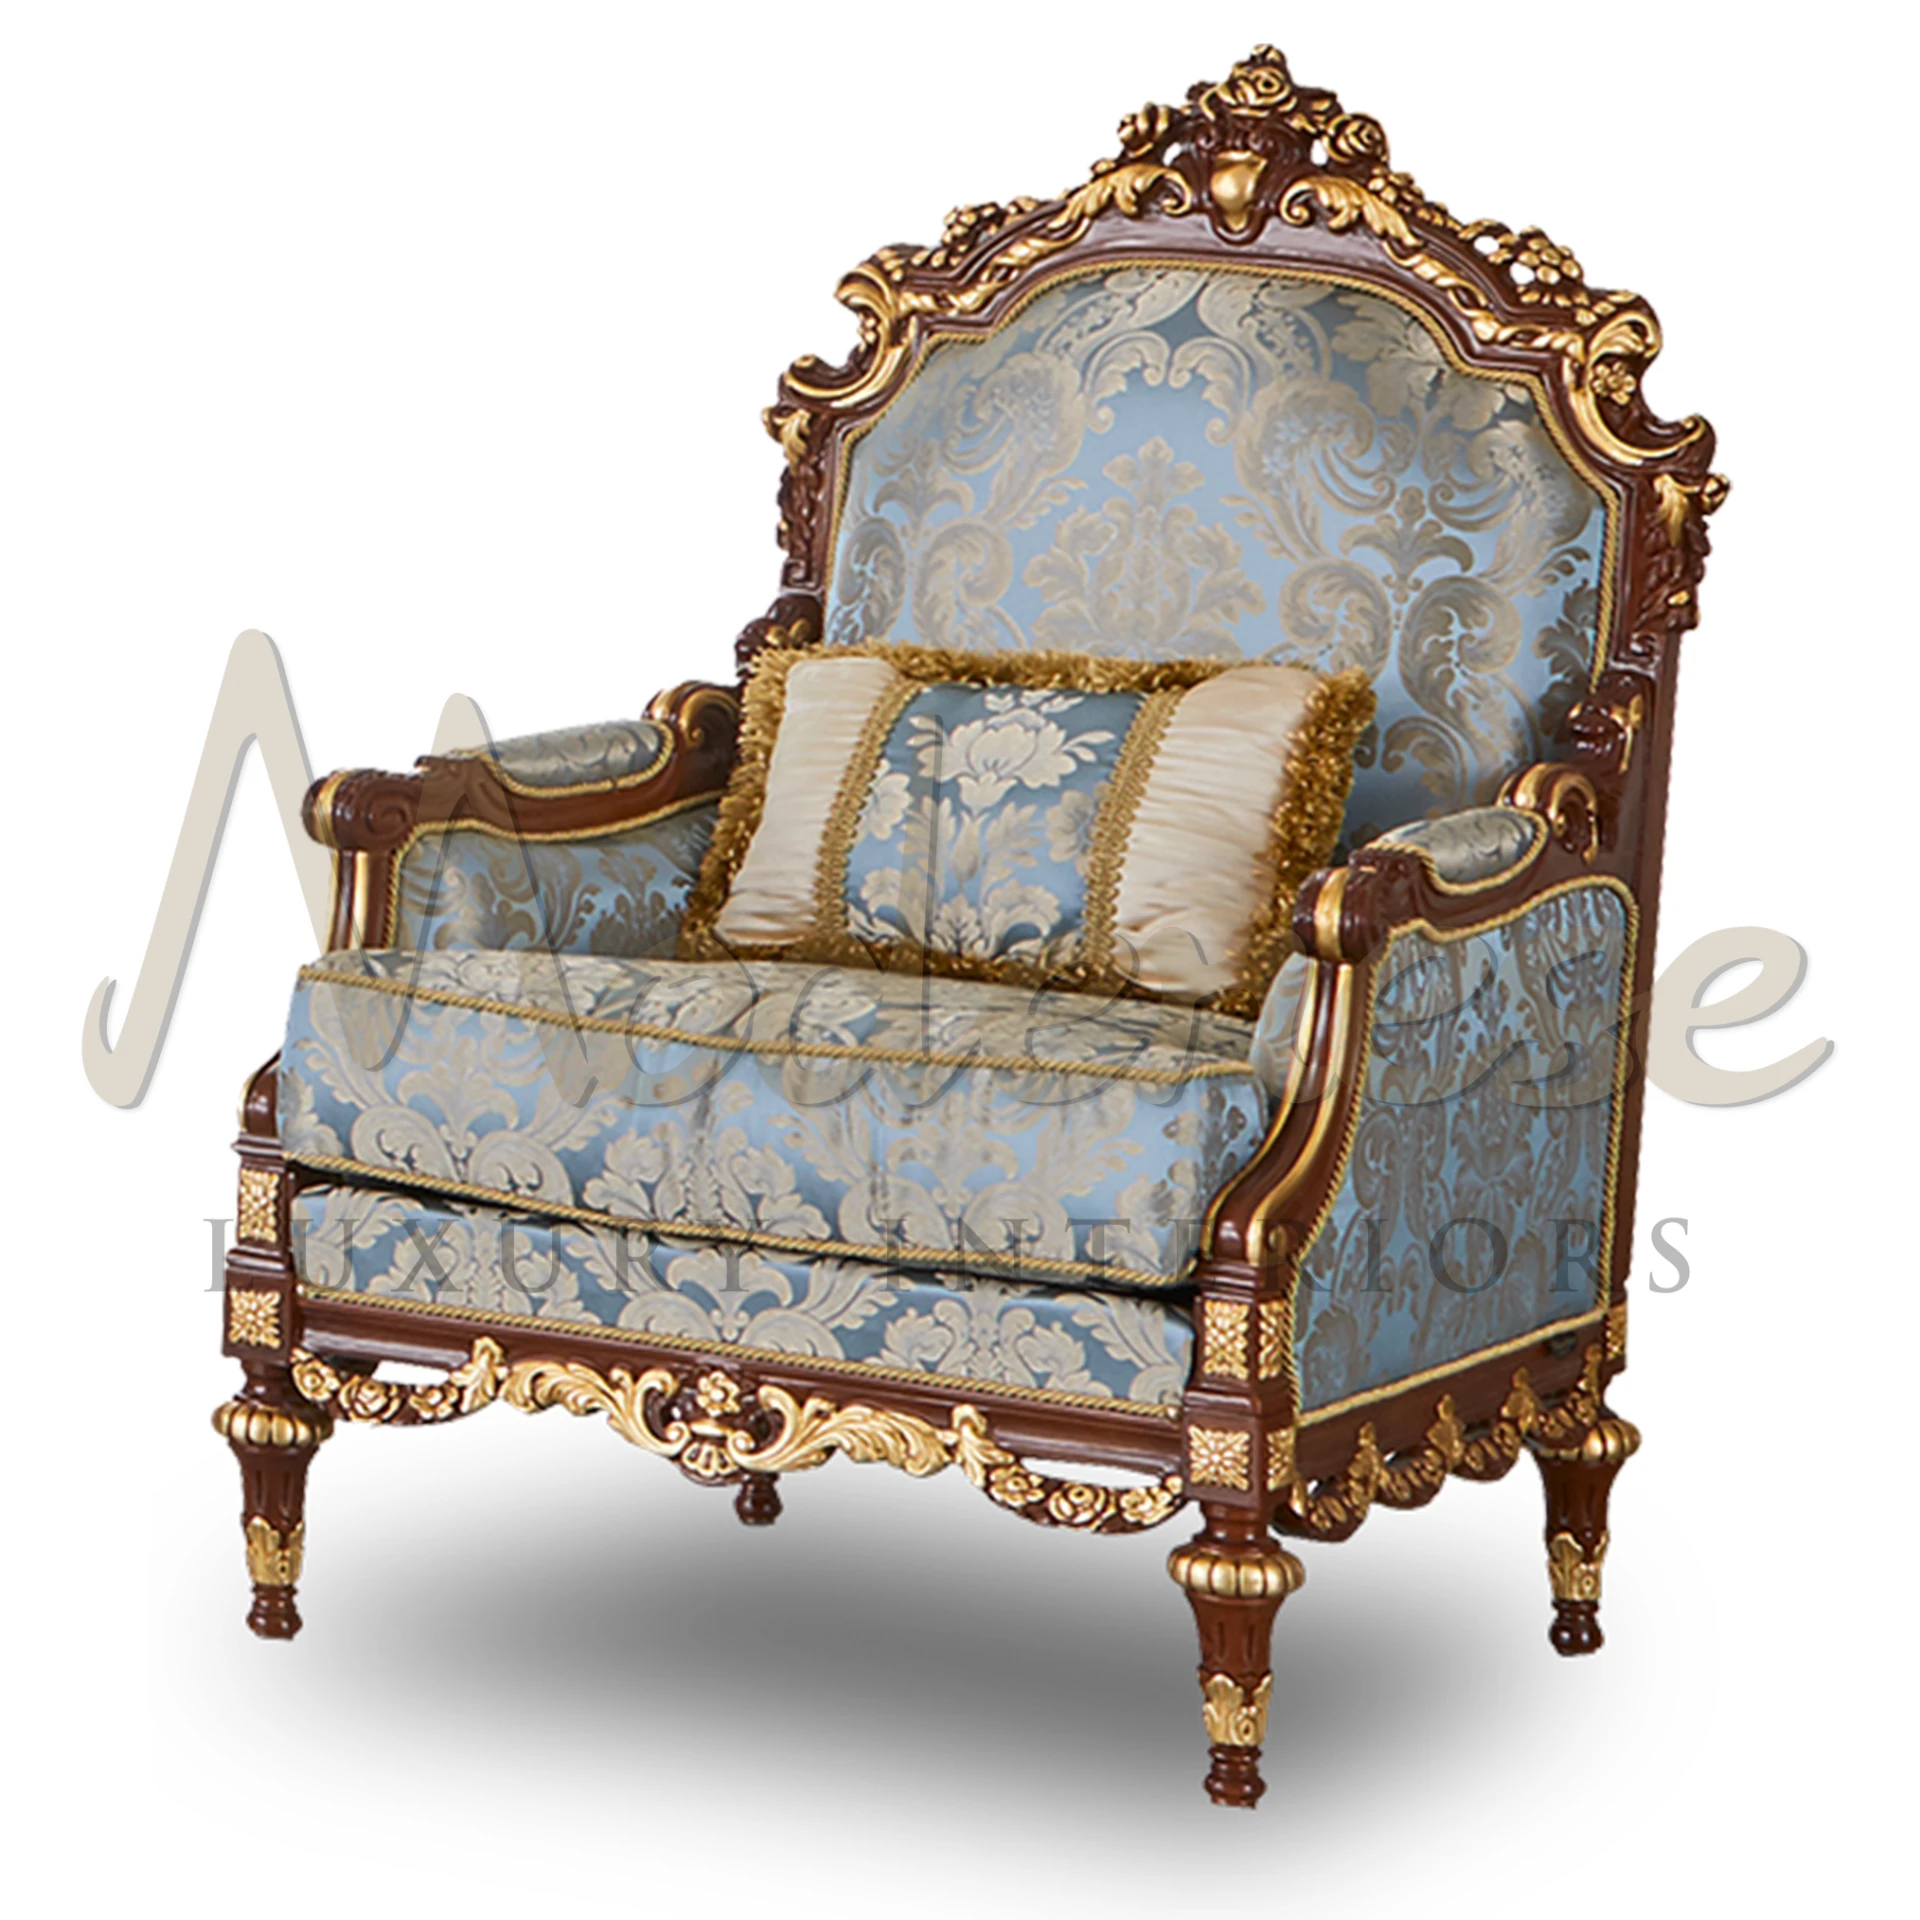 Royal Empire Light Blue Armchair with sturdy frame and comfortable seating, adorned in sky blue pattern fabric for elegance.